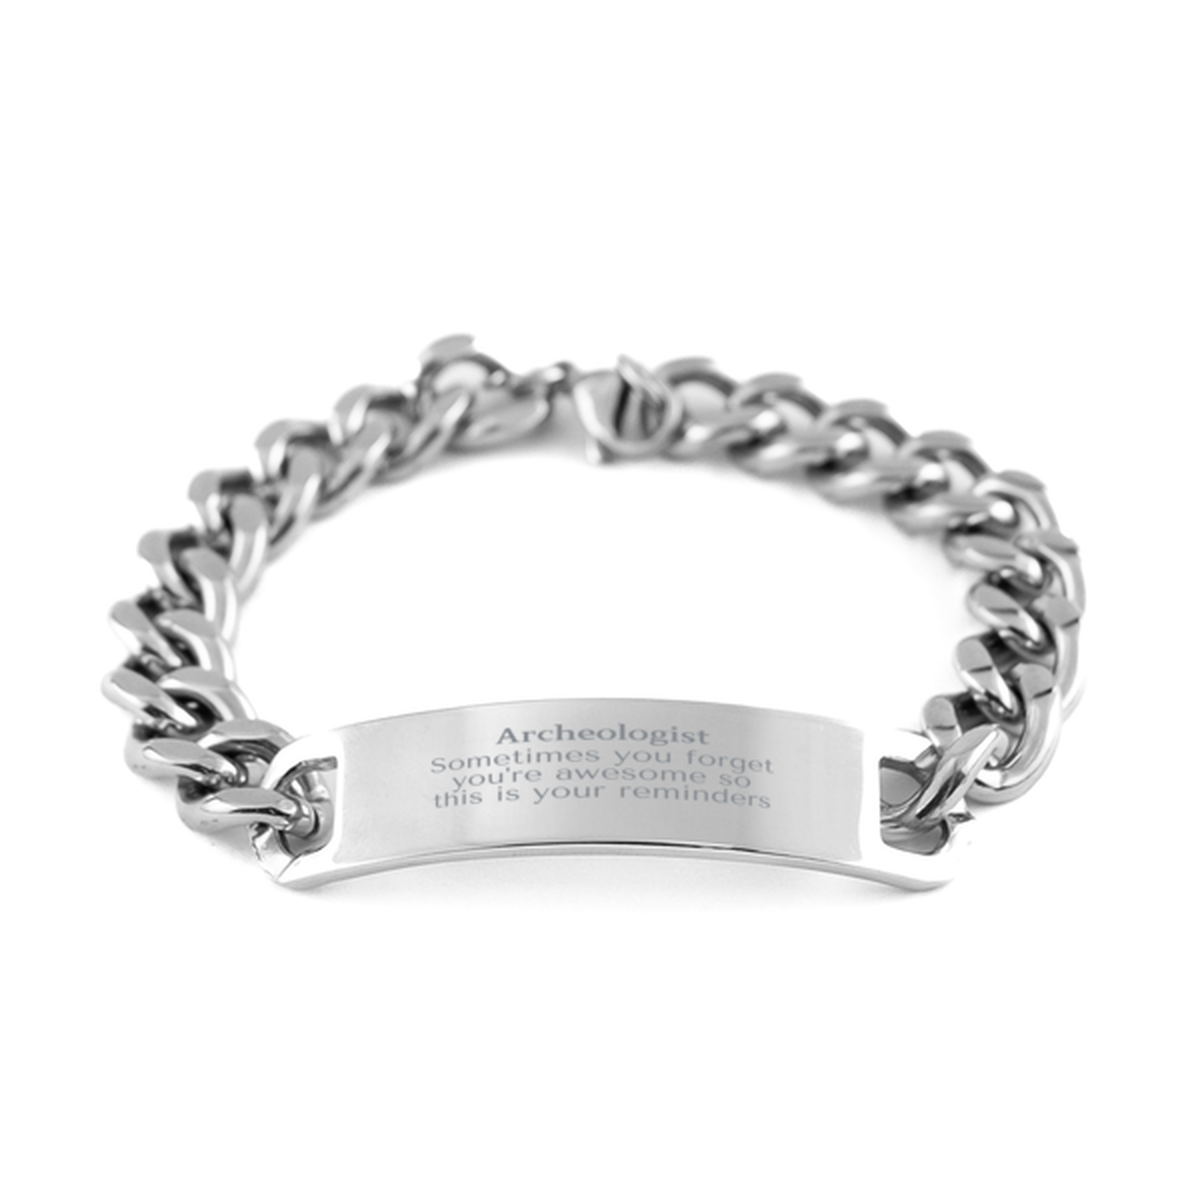 Sentimental Archeologist Cuban Chain Stainless Steel Bracelet, Archeologist Sometimes you forget you're awesome so this is your reminders, Graduation Christmas Birthday Gifts for Archeologist, Men, Women, Coworkers